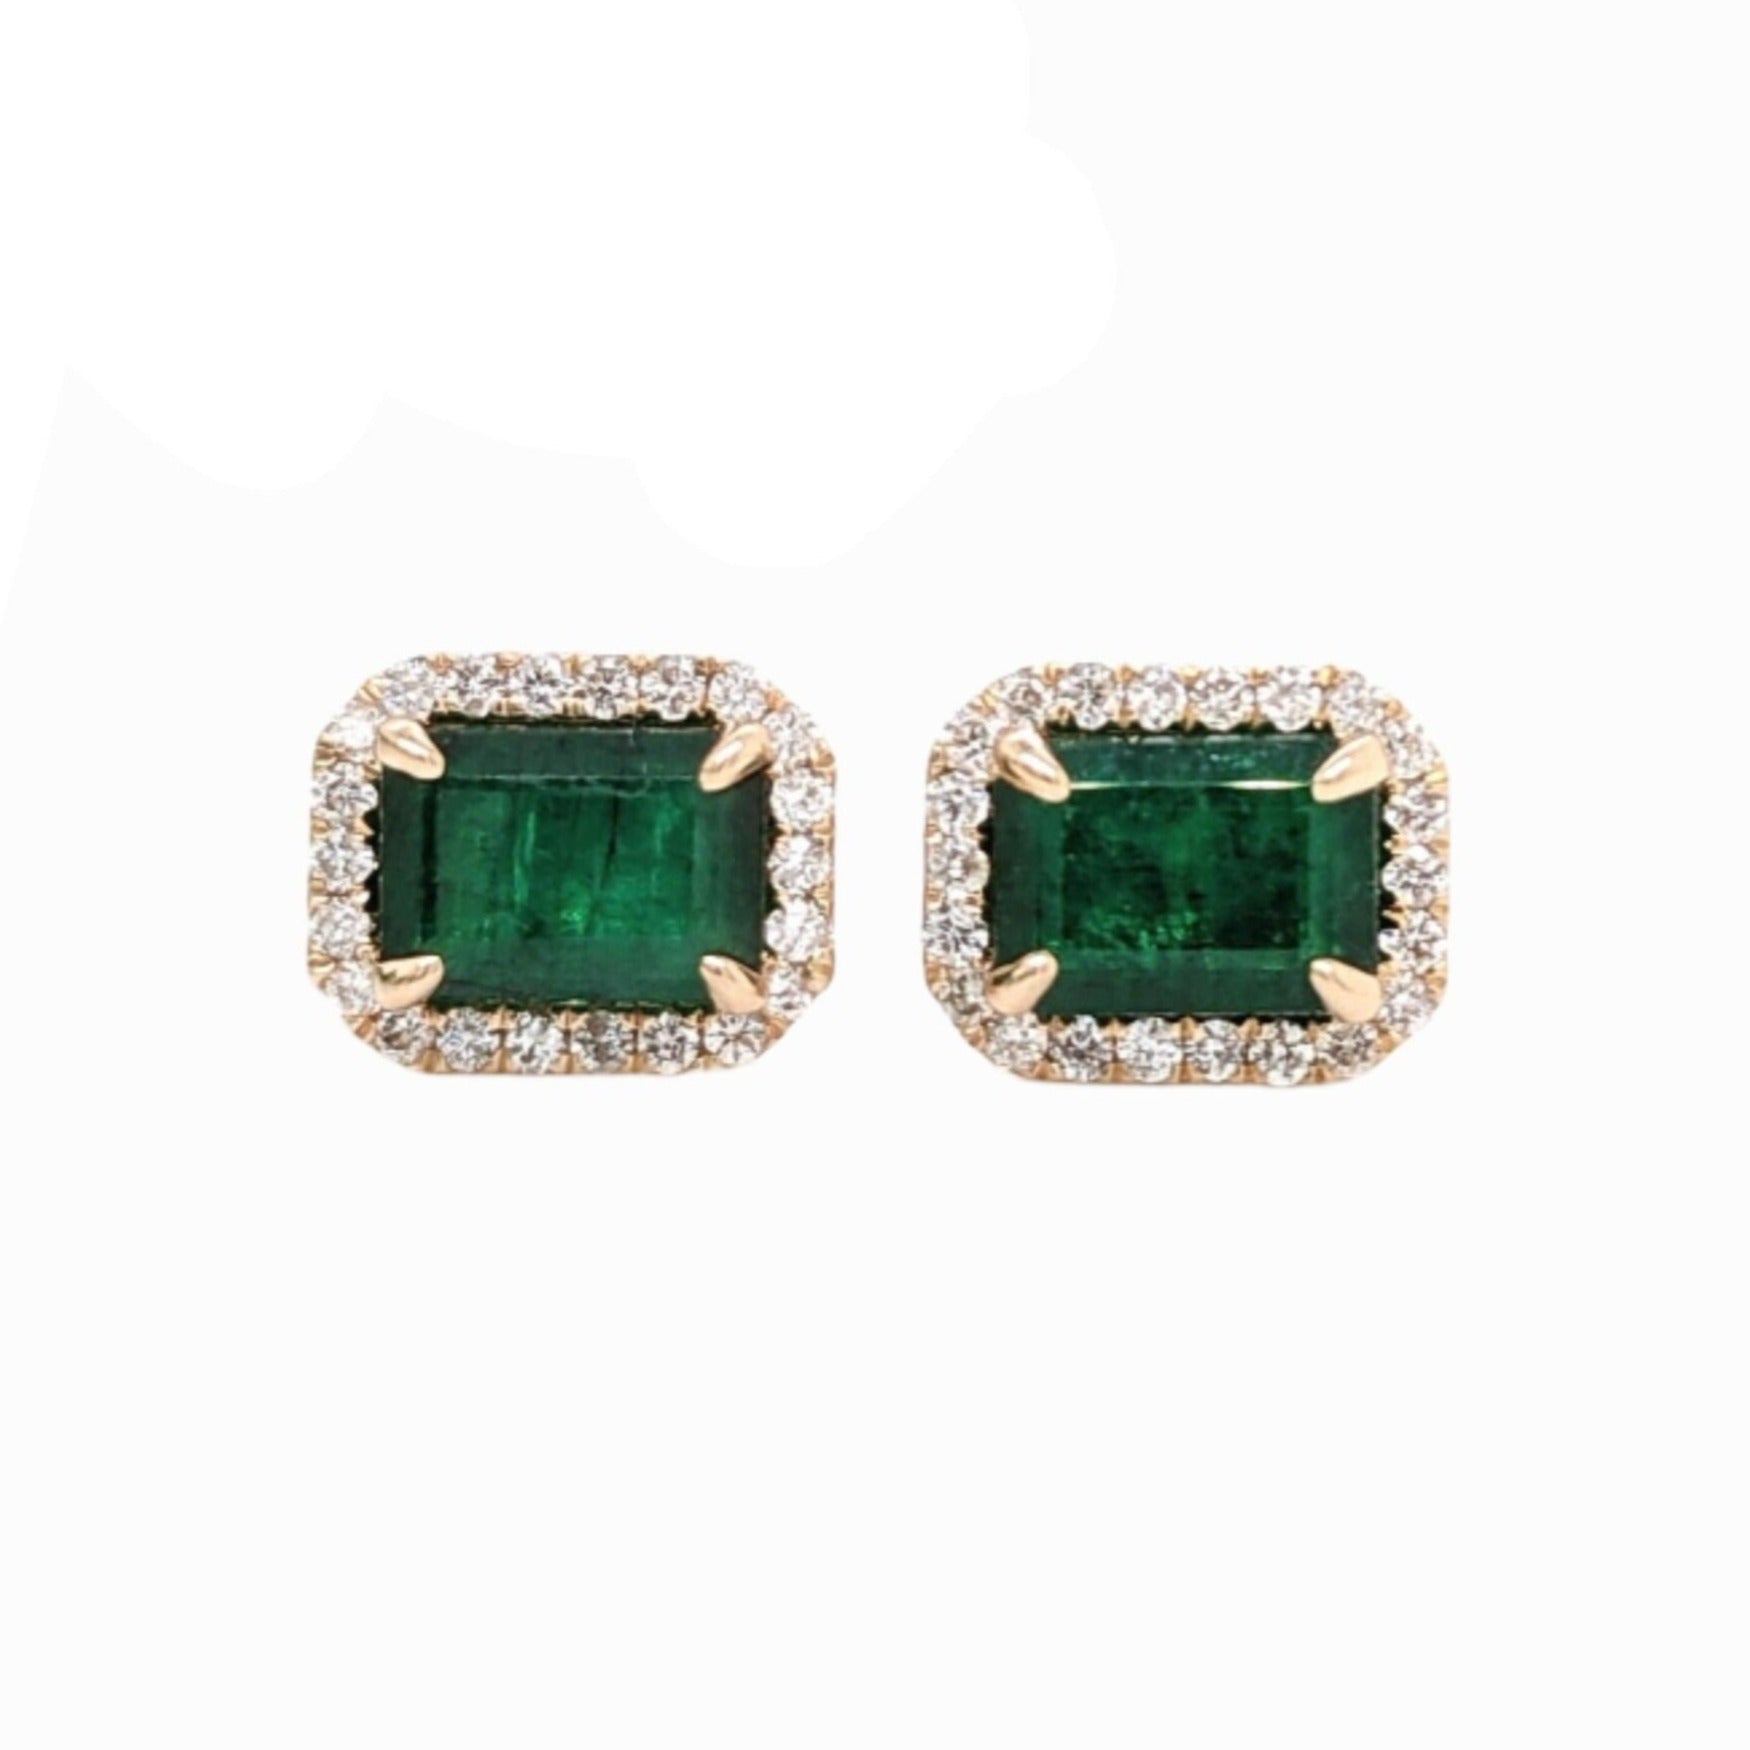 Forest Green Emerald Studs with a Diamond Halo in Solid 14K White Gold | 7x5mm